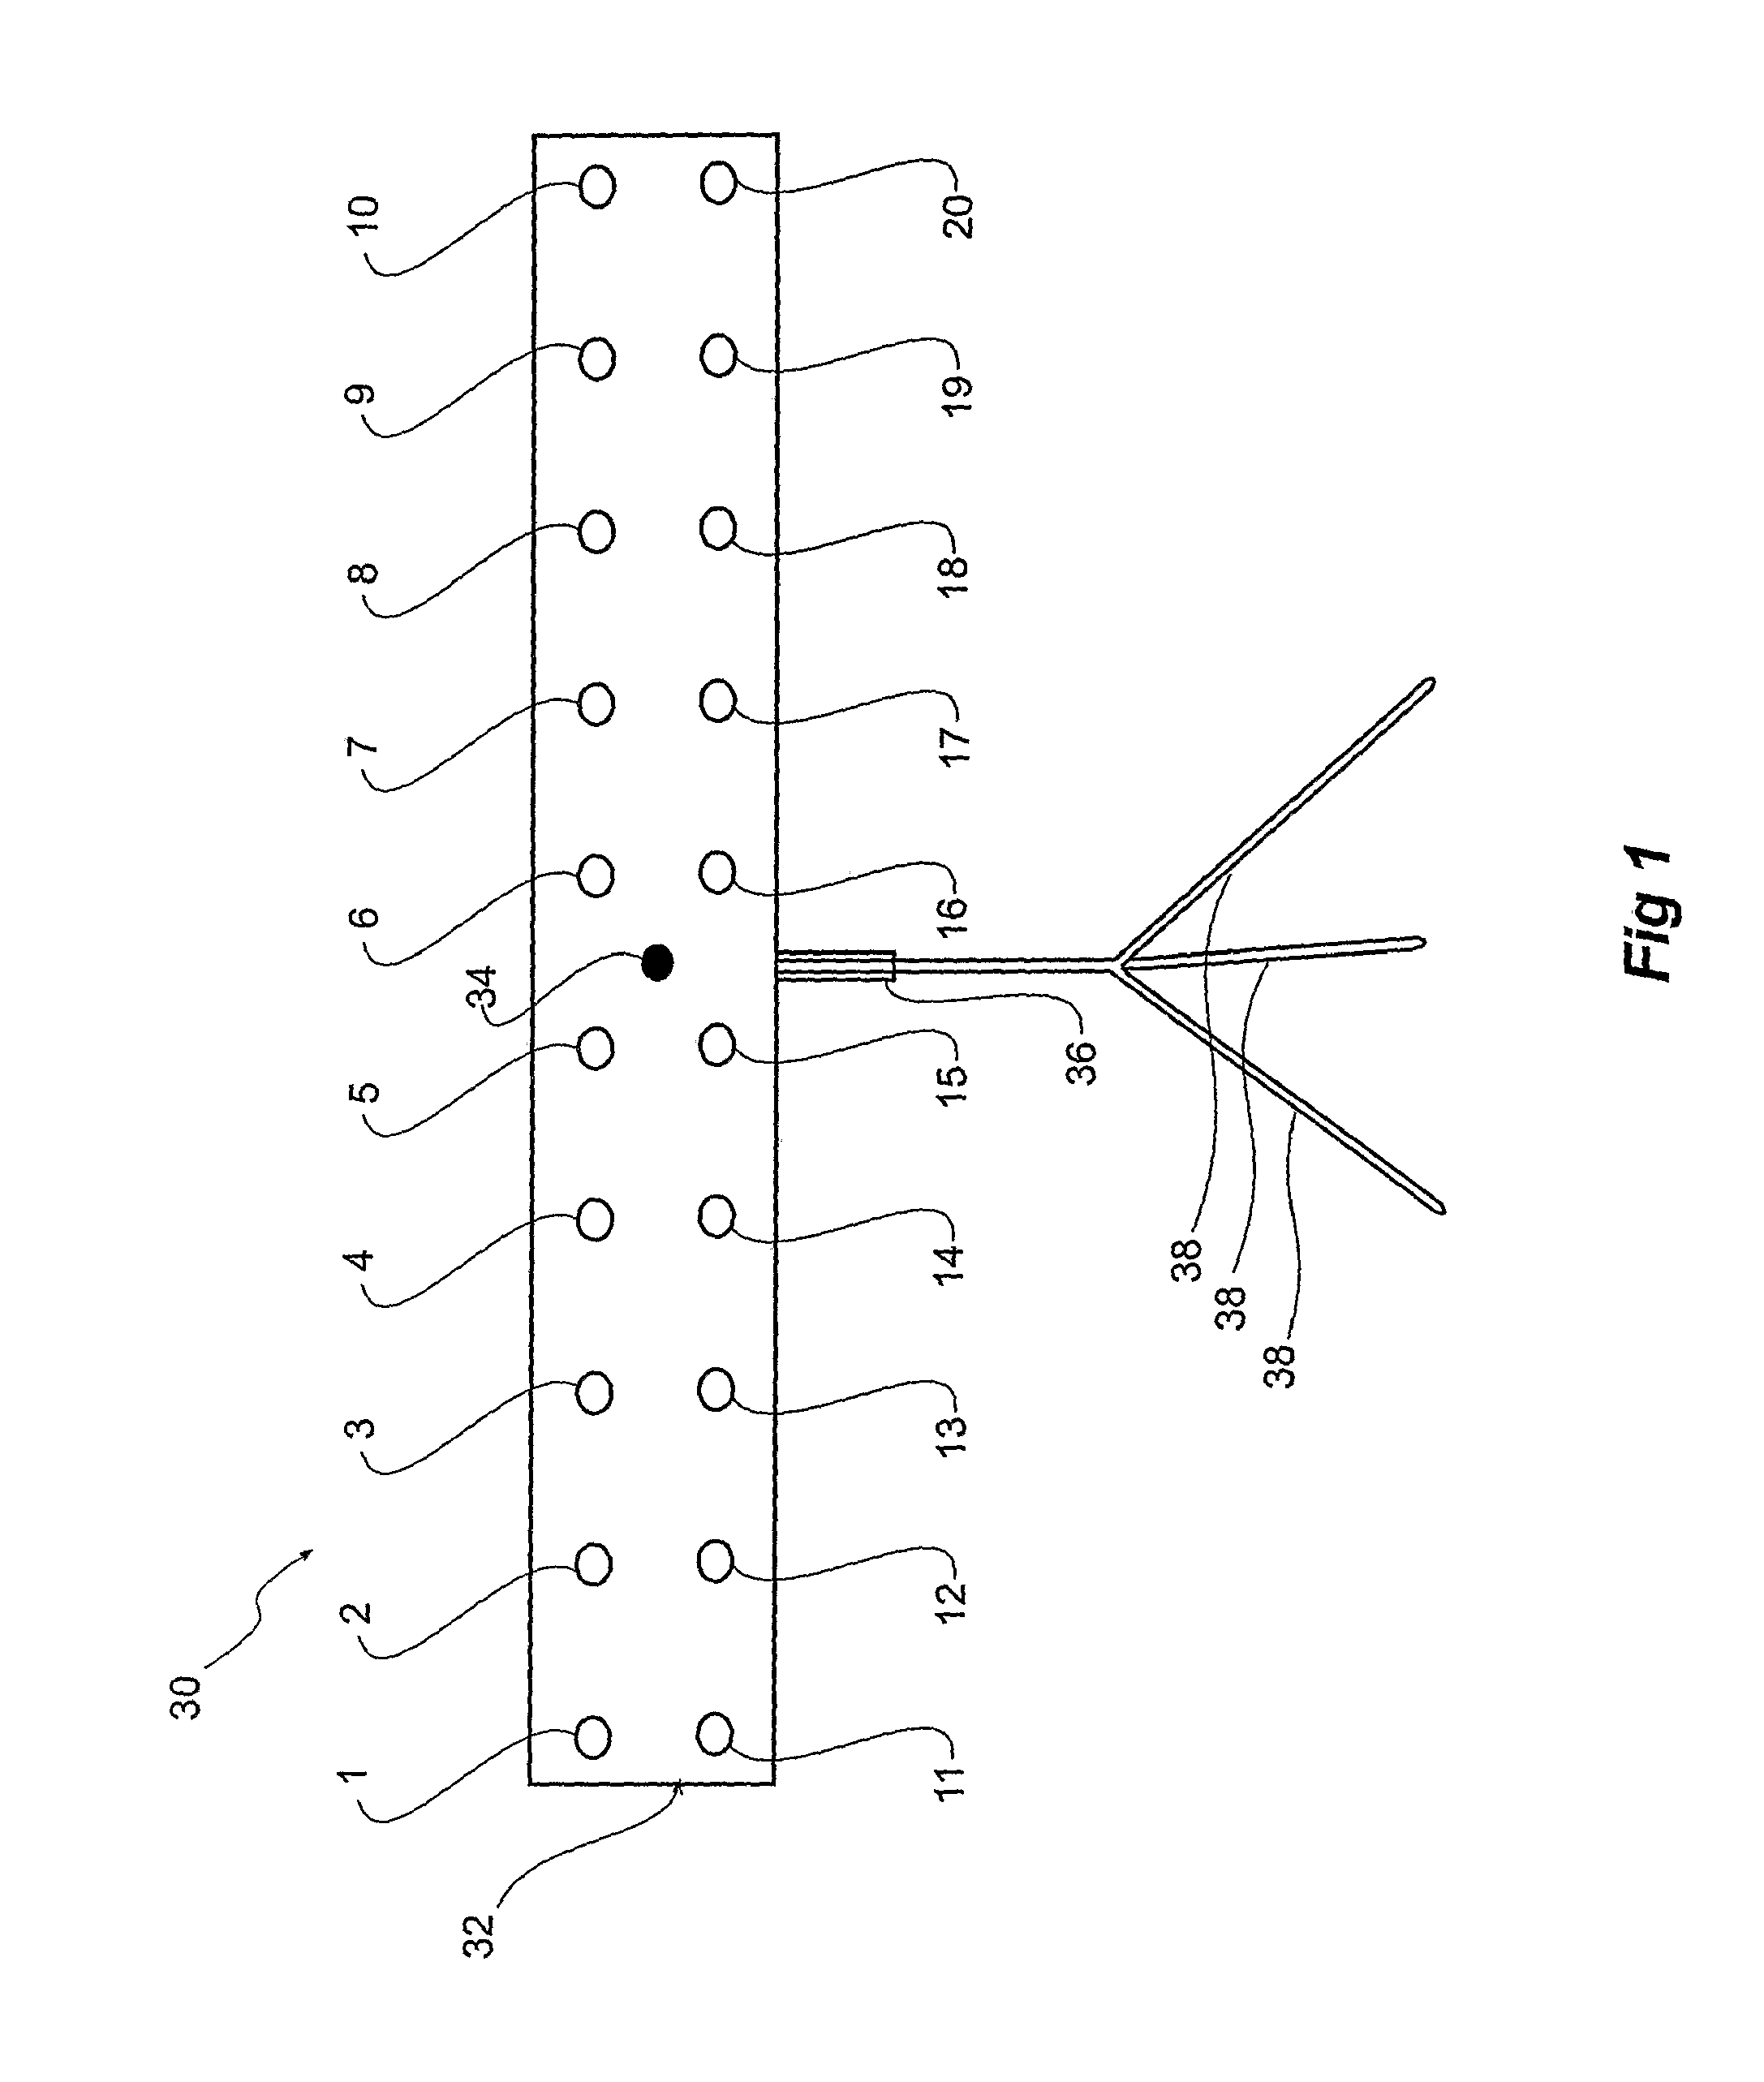 Apparatus and method for assessment and rehabilitation after acquired brain injury